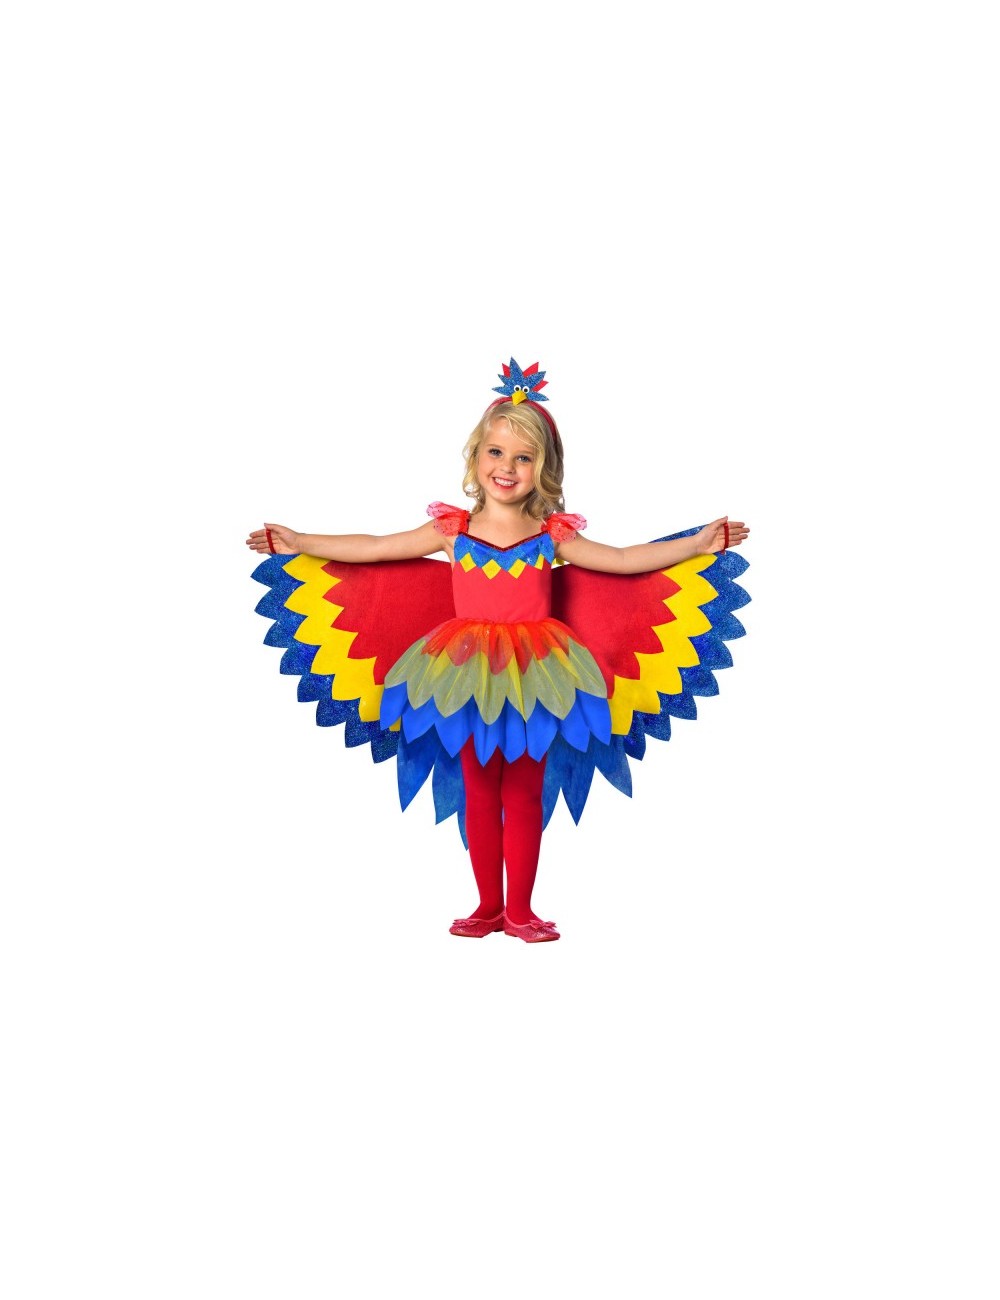 Rouge Perroquet Déguisement Pirate animal oiseau adultes Fun Fantaisie Costume Outfit 